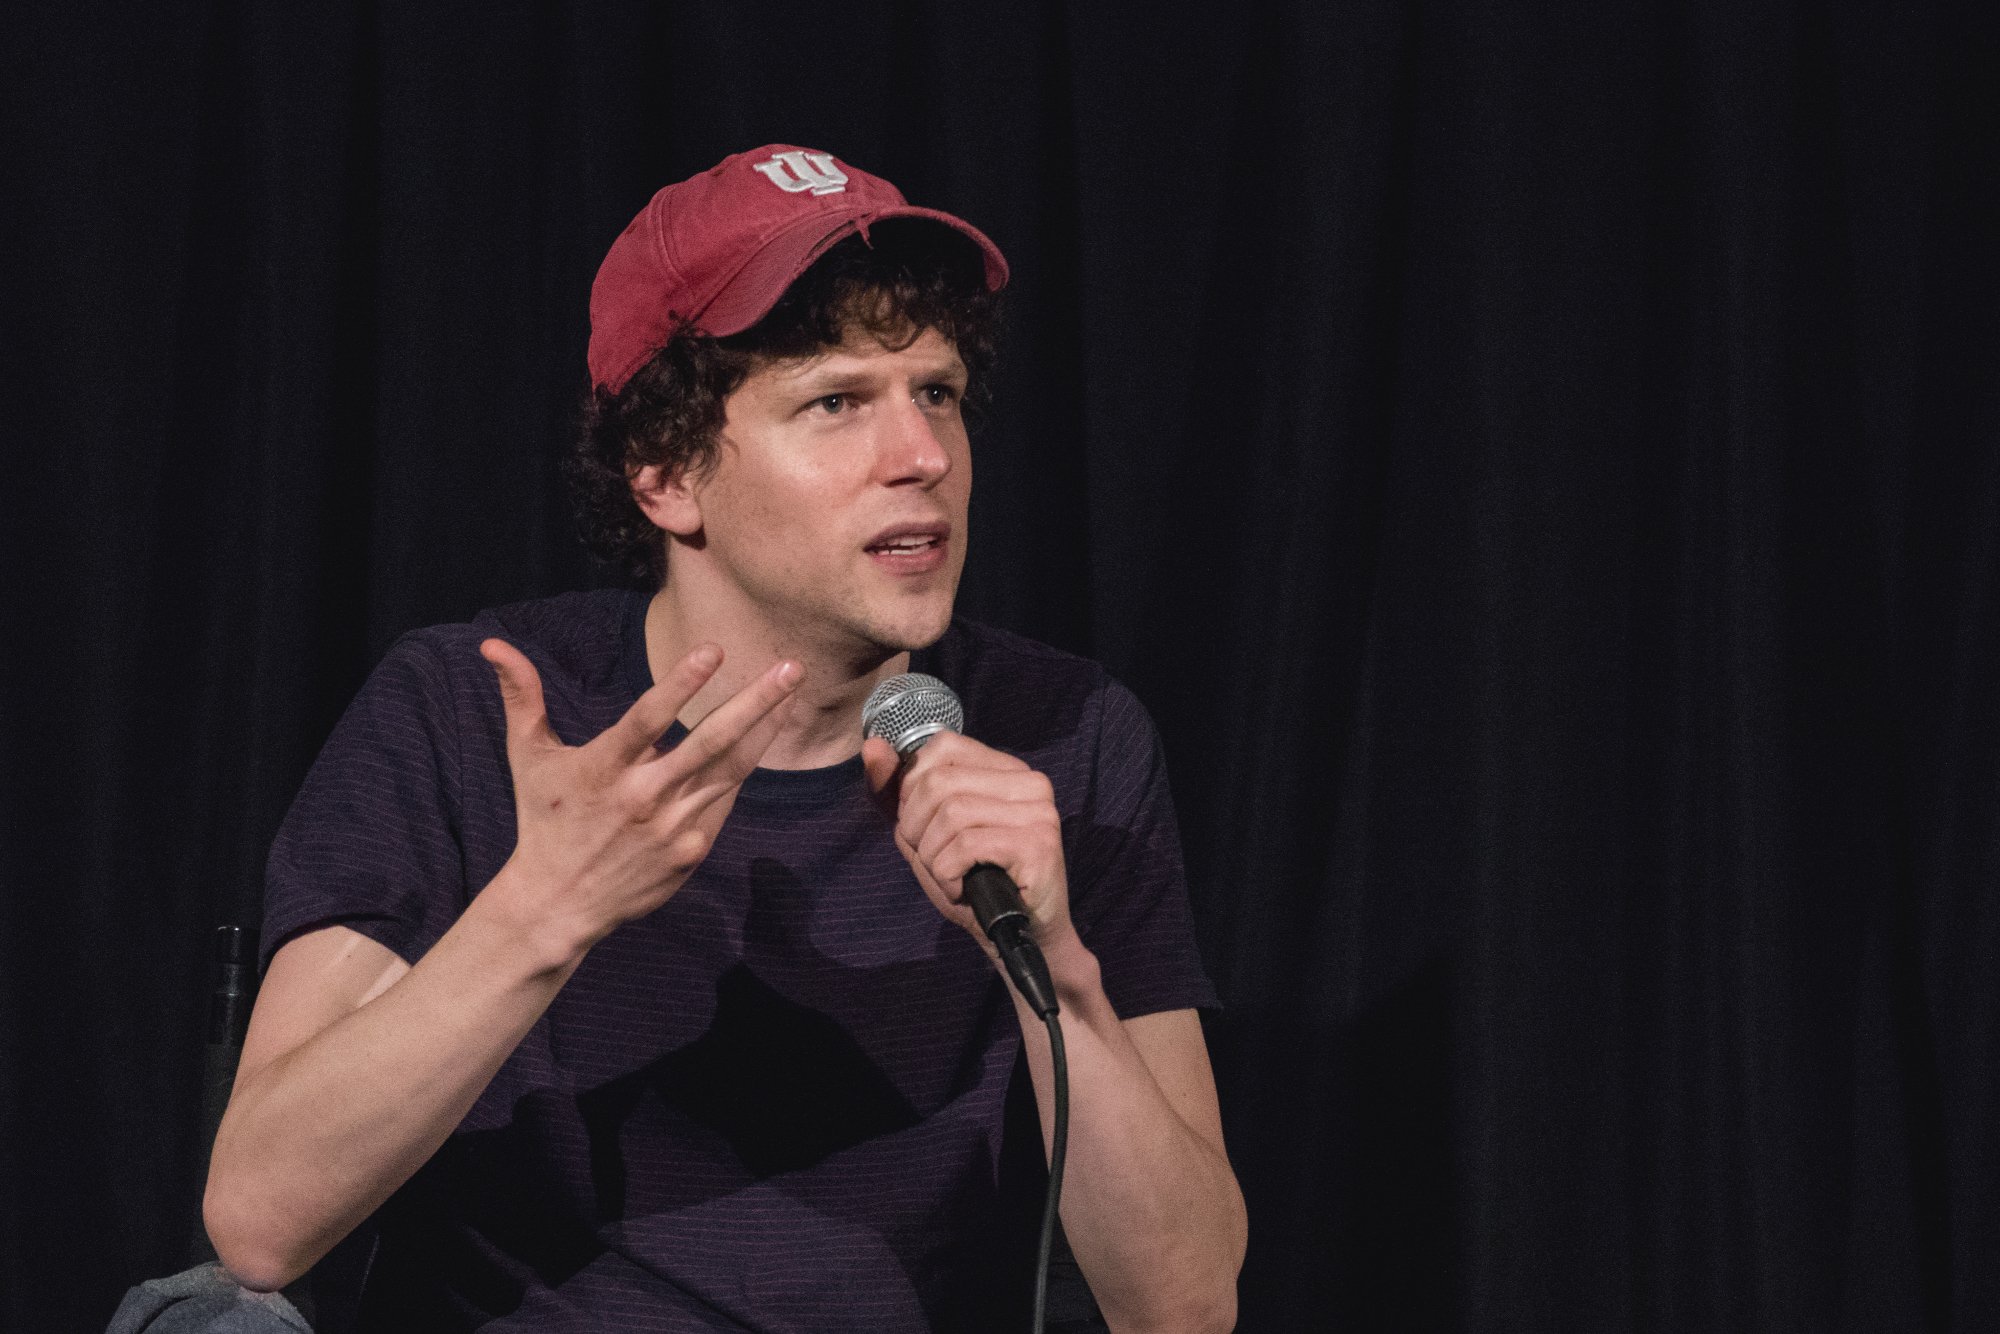 'When You Finish Saving the World' Jesse Eisenberg title holding a microphone and wearing a hat